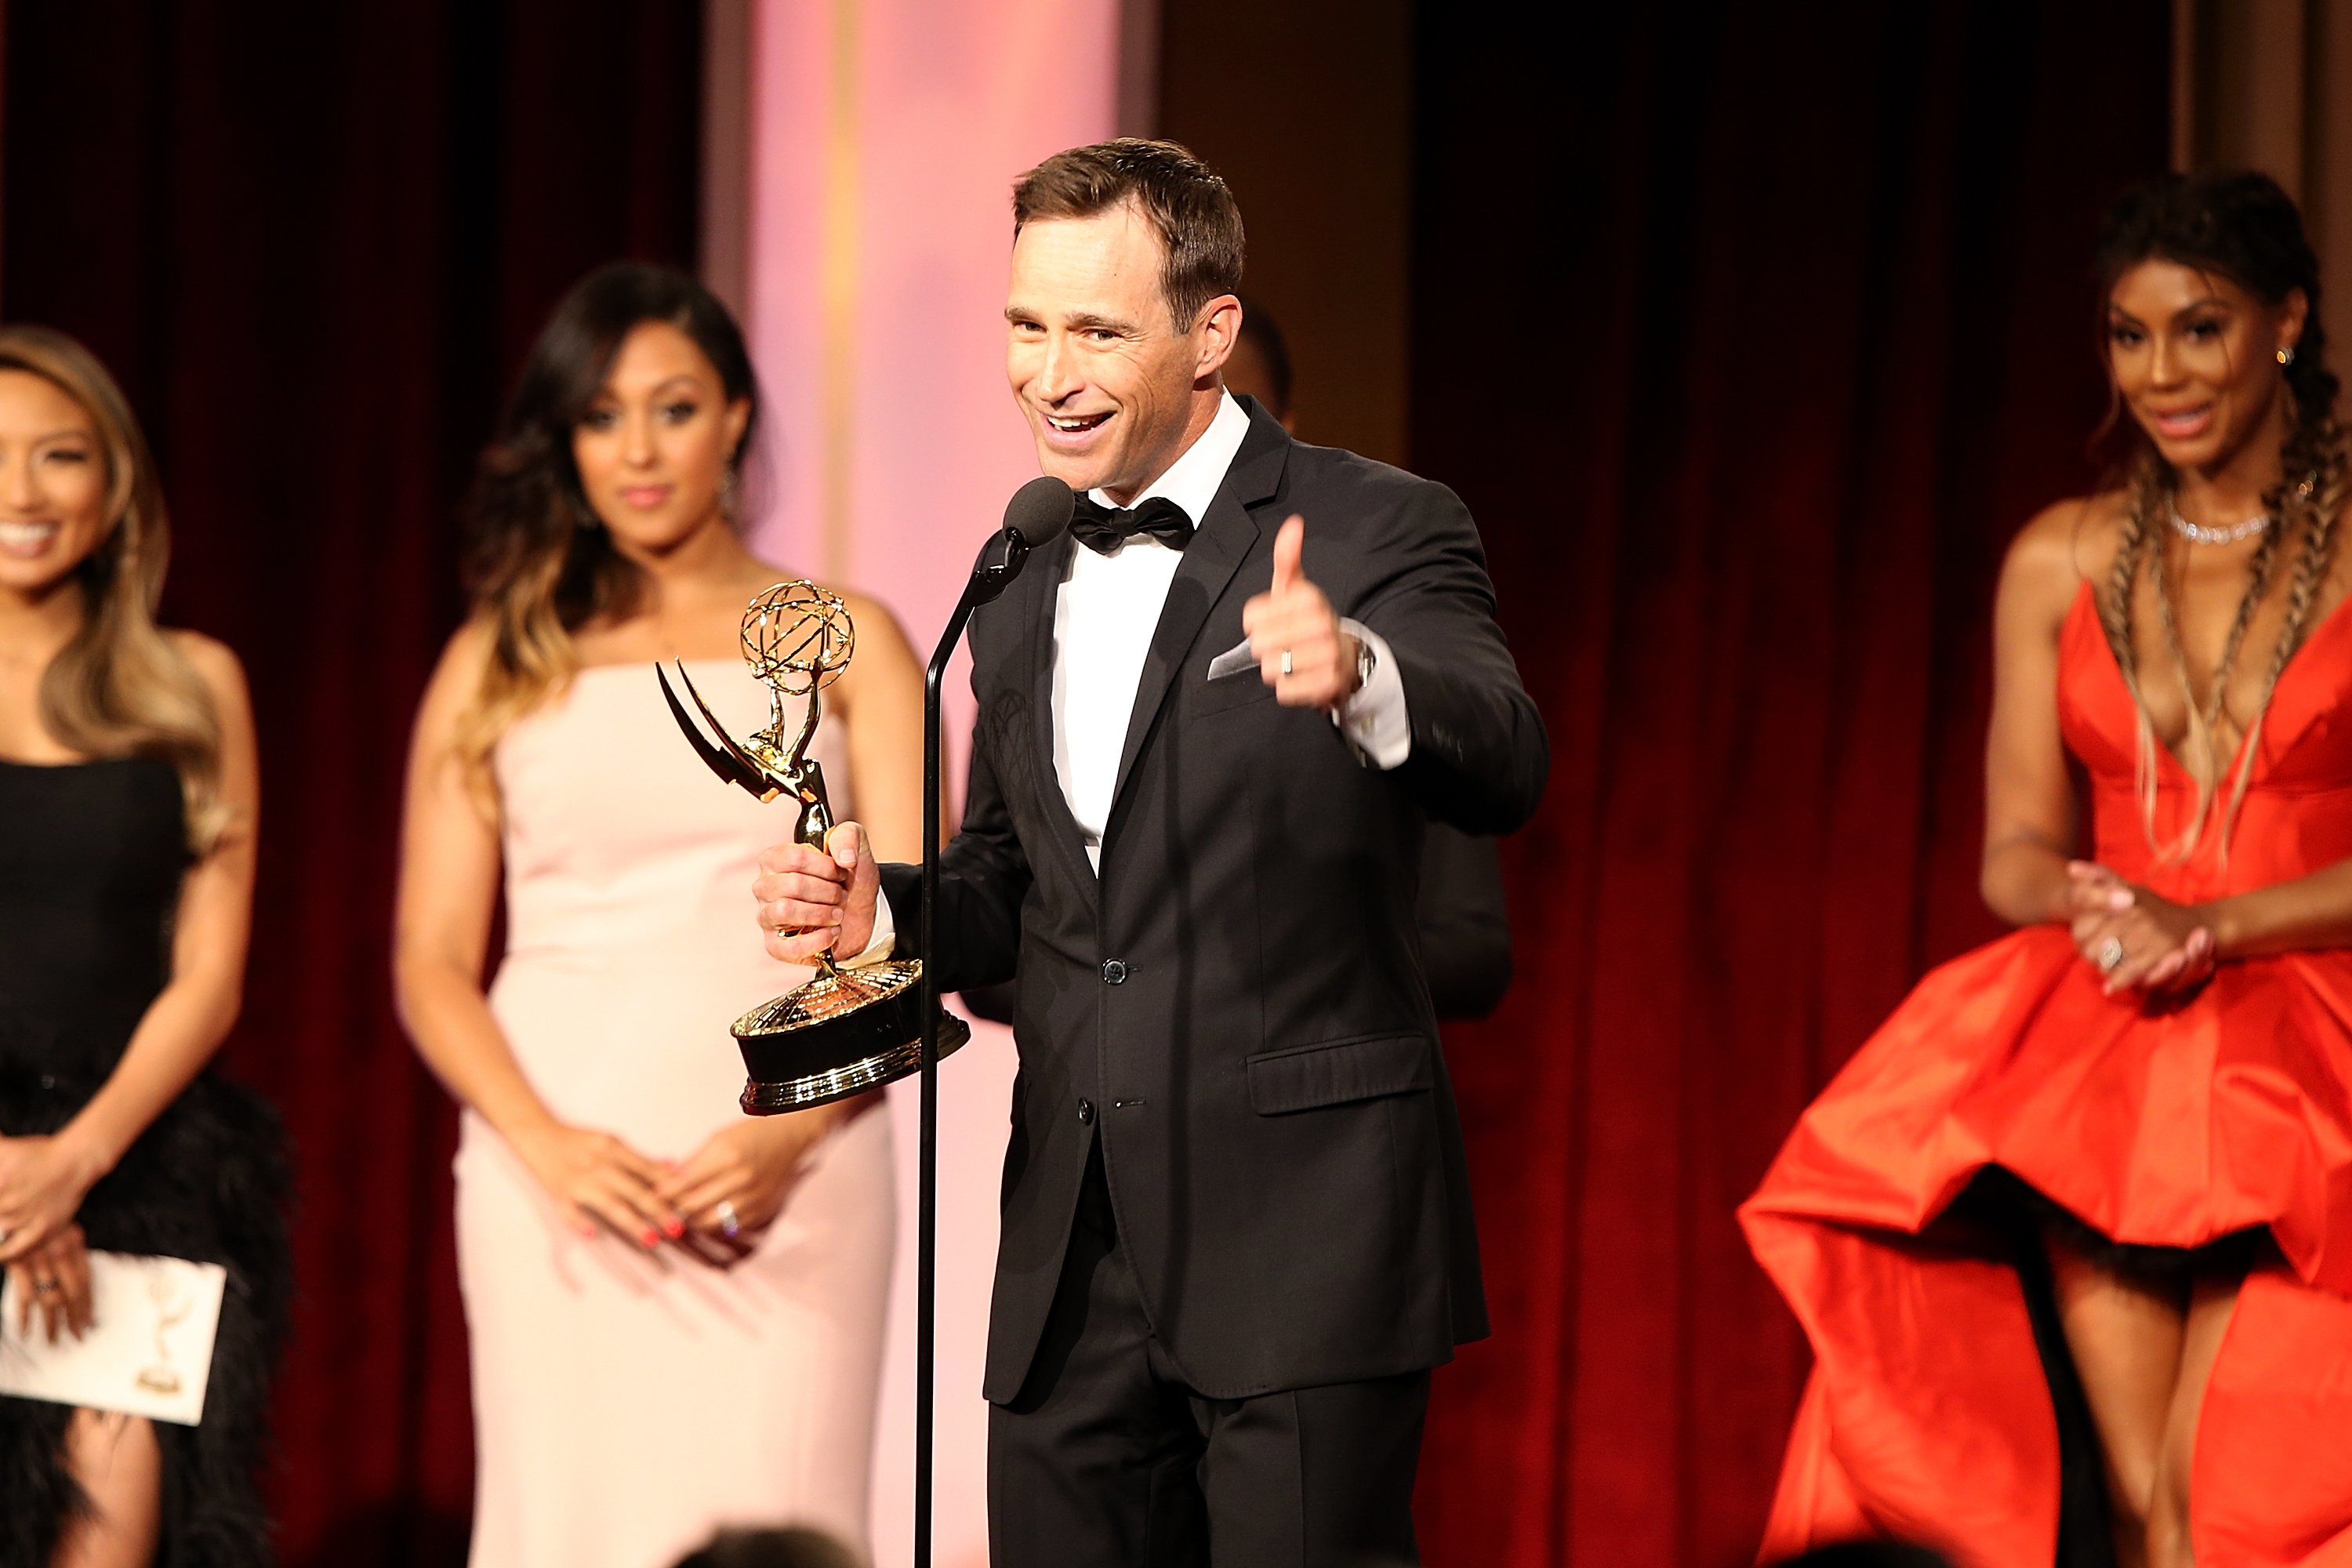 Richards stands onstage in a tuxedo, accepting a Daytime Emmy Award.